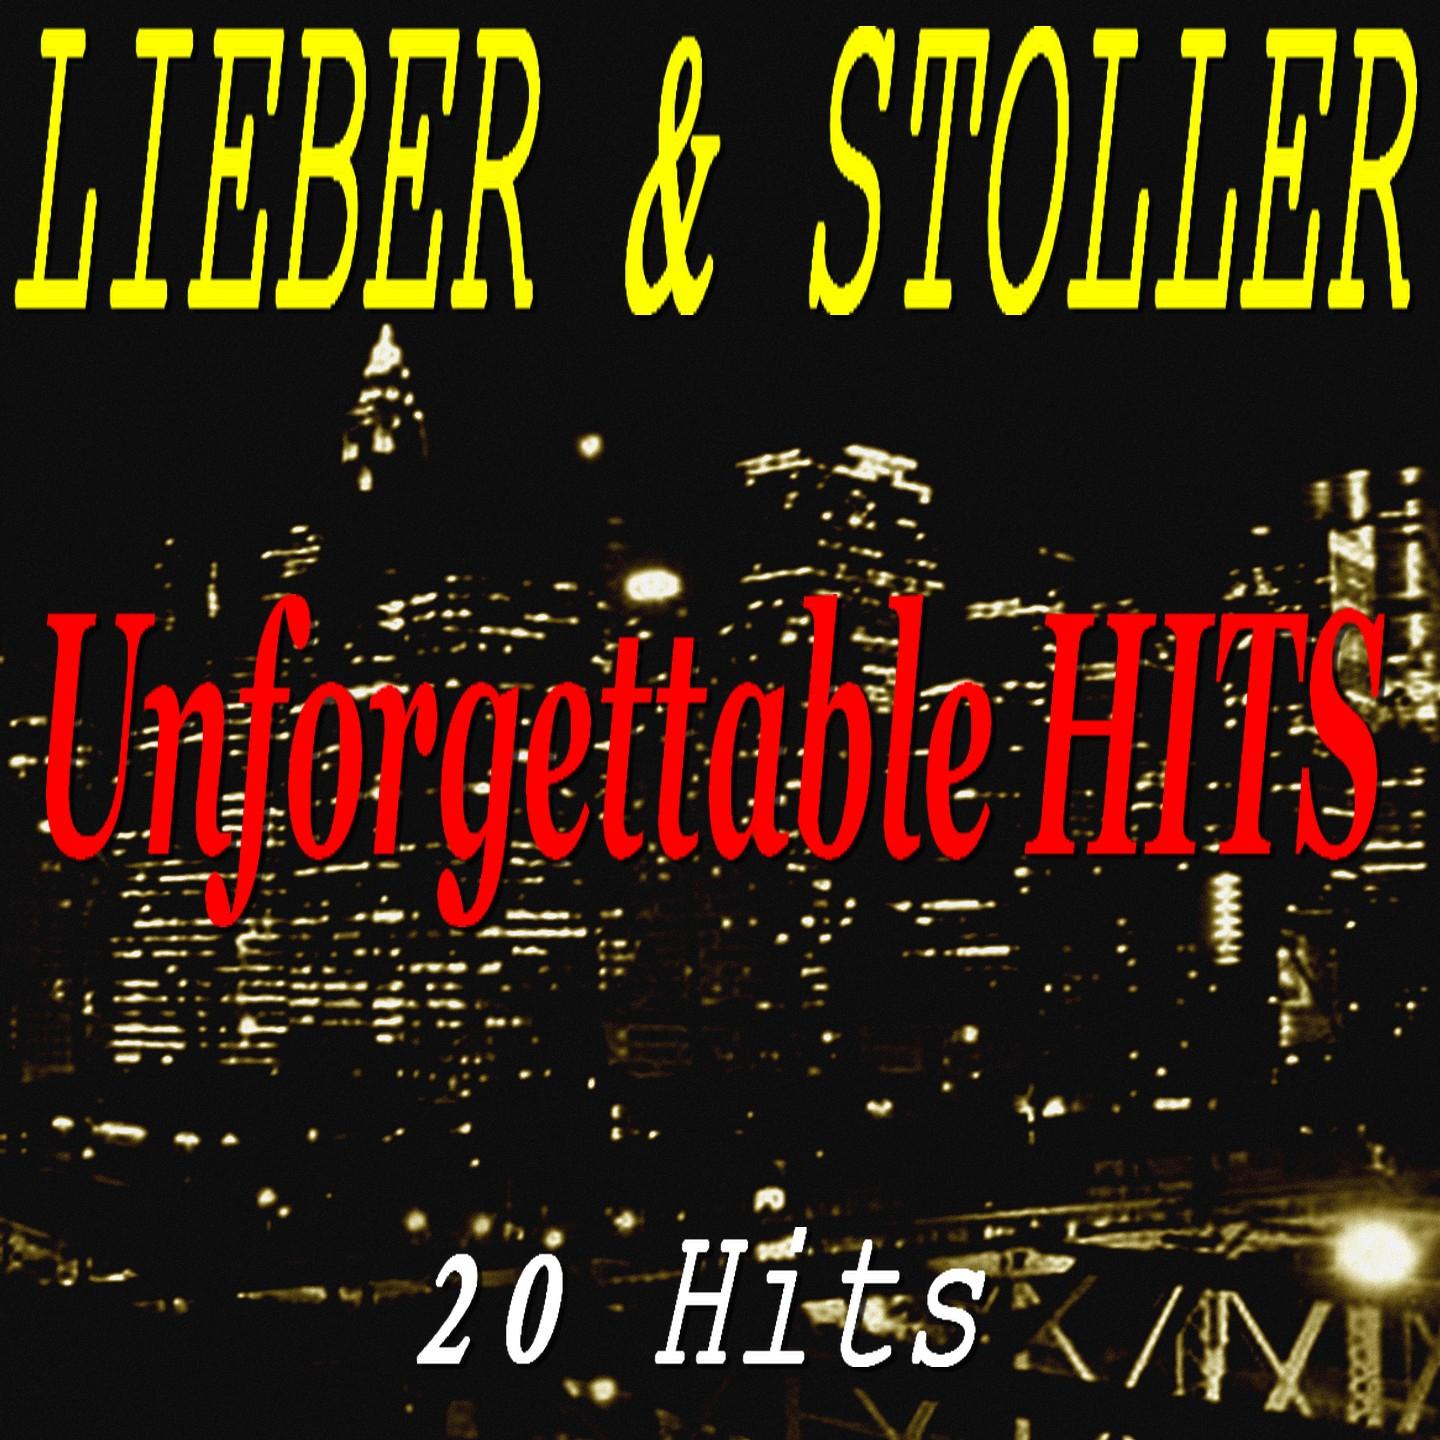 Lieber & Stoller (Unforgettable Hits - 20 Hits)